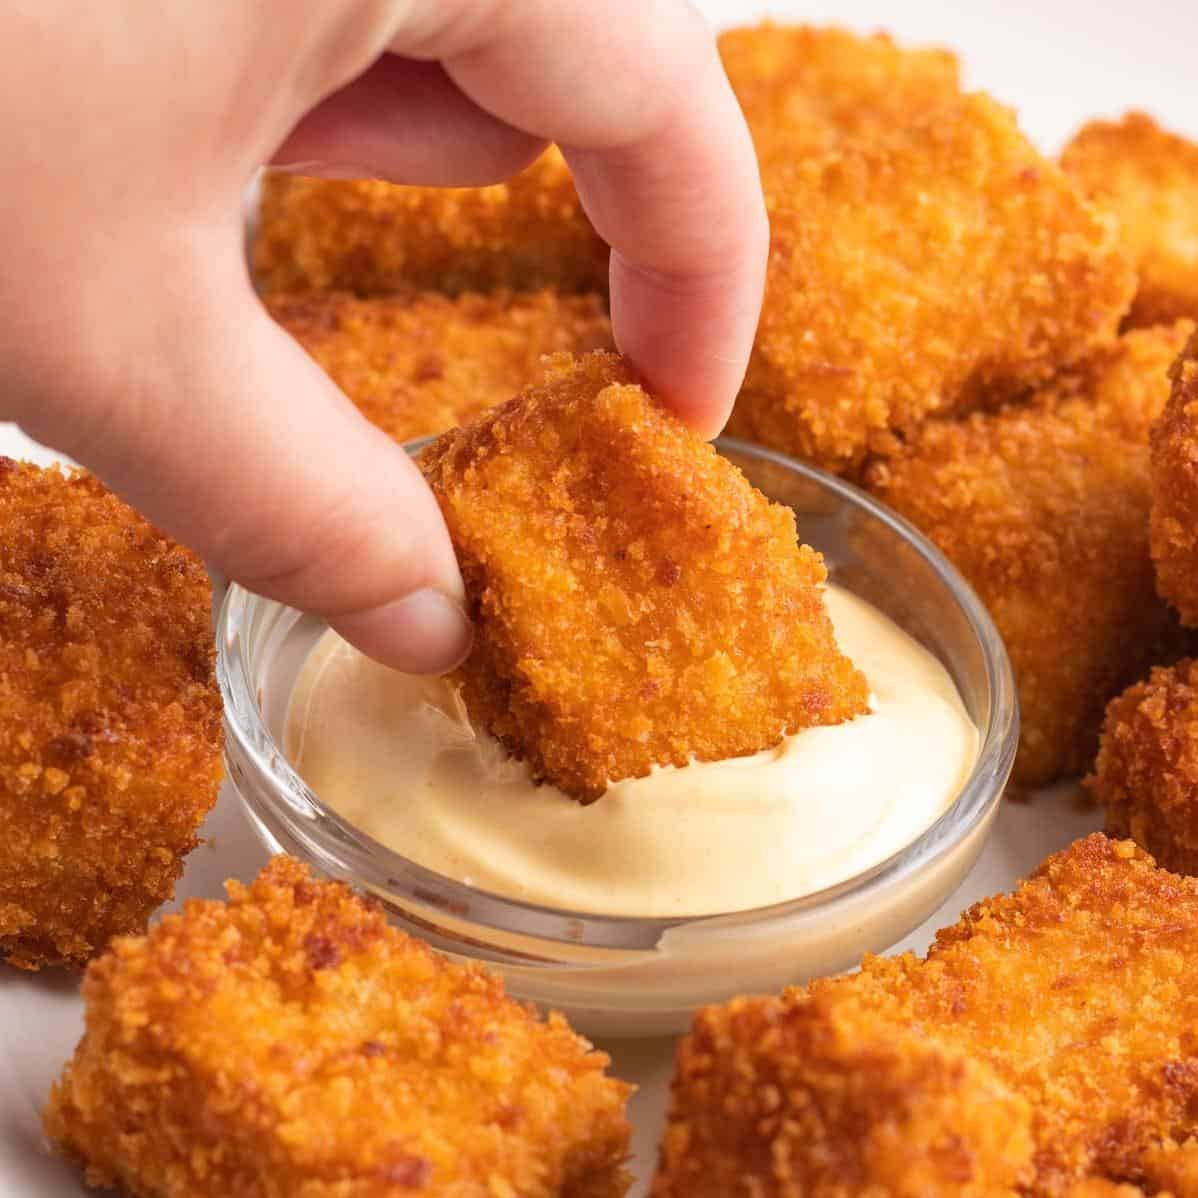  Who needs real chicken when you can have these amazing baked tofu nuggets?